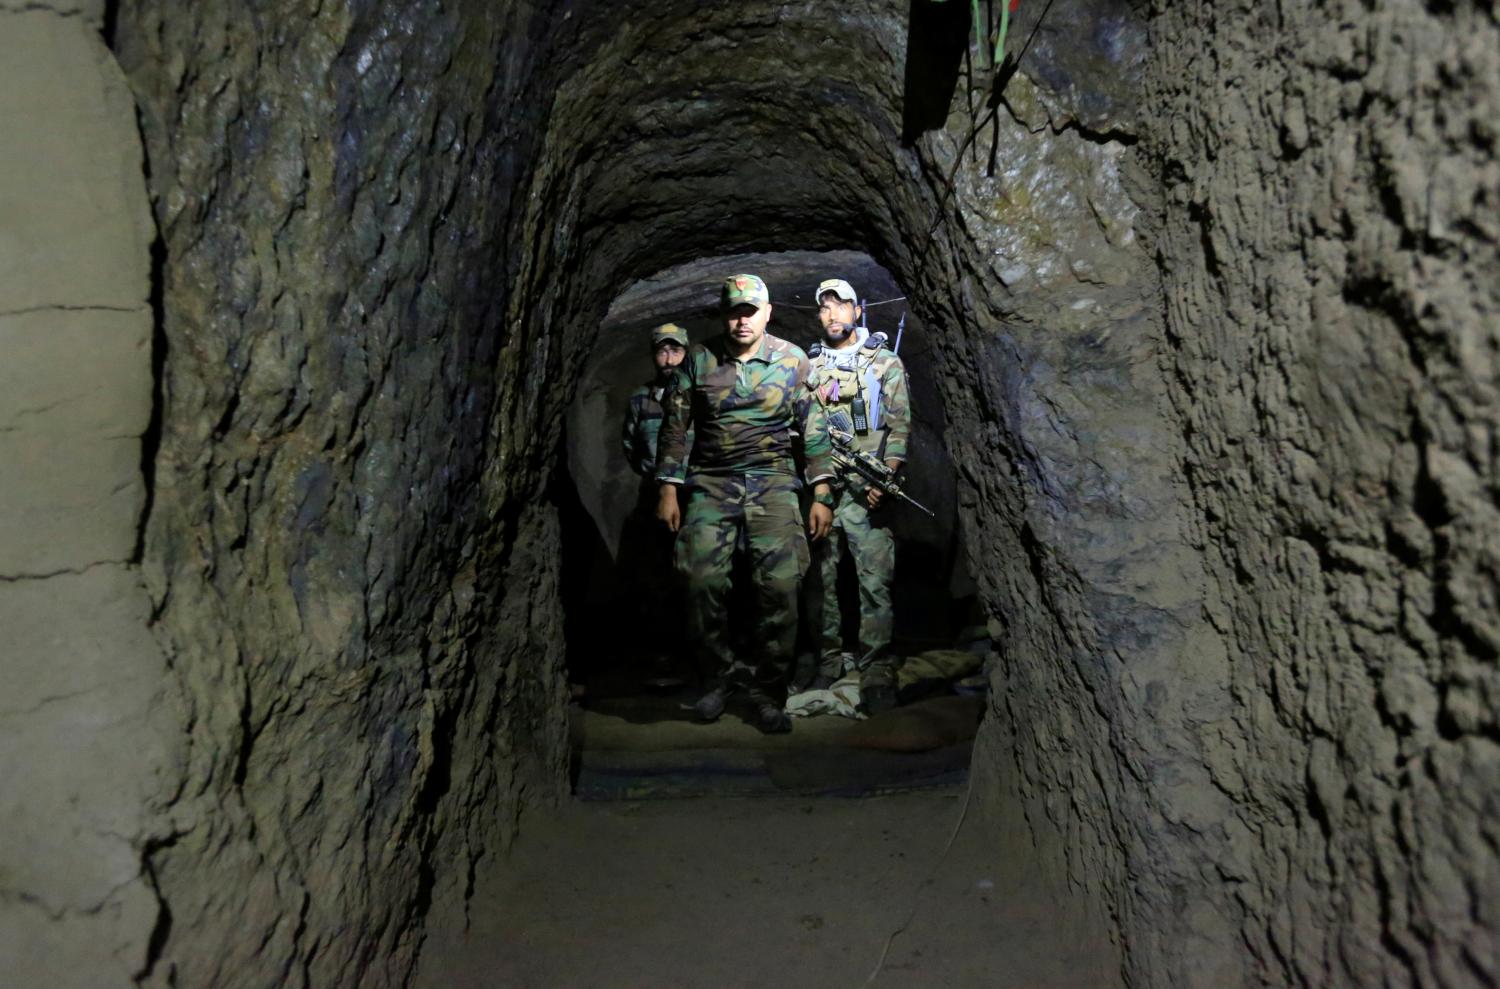 DATE IMPORTED:April 24, 2017Afghan Special Forces inspect inside a cave which was used by suspected Islamic State militants at the site where a MOAB, or ''mother of all bombs'', struck the Achin district of the eastern province of Nangarhar, Afghanistan April 23, 2017. REUTERS/Parwiz